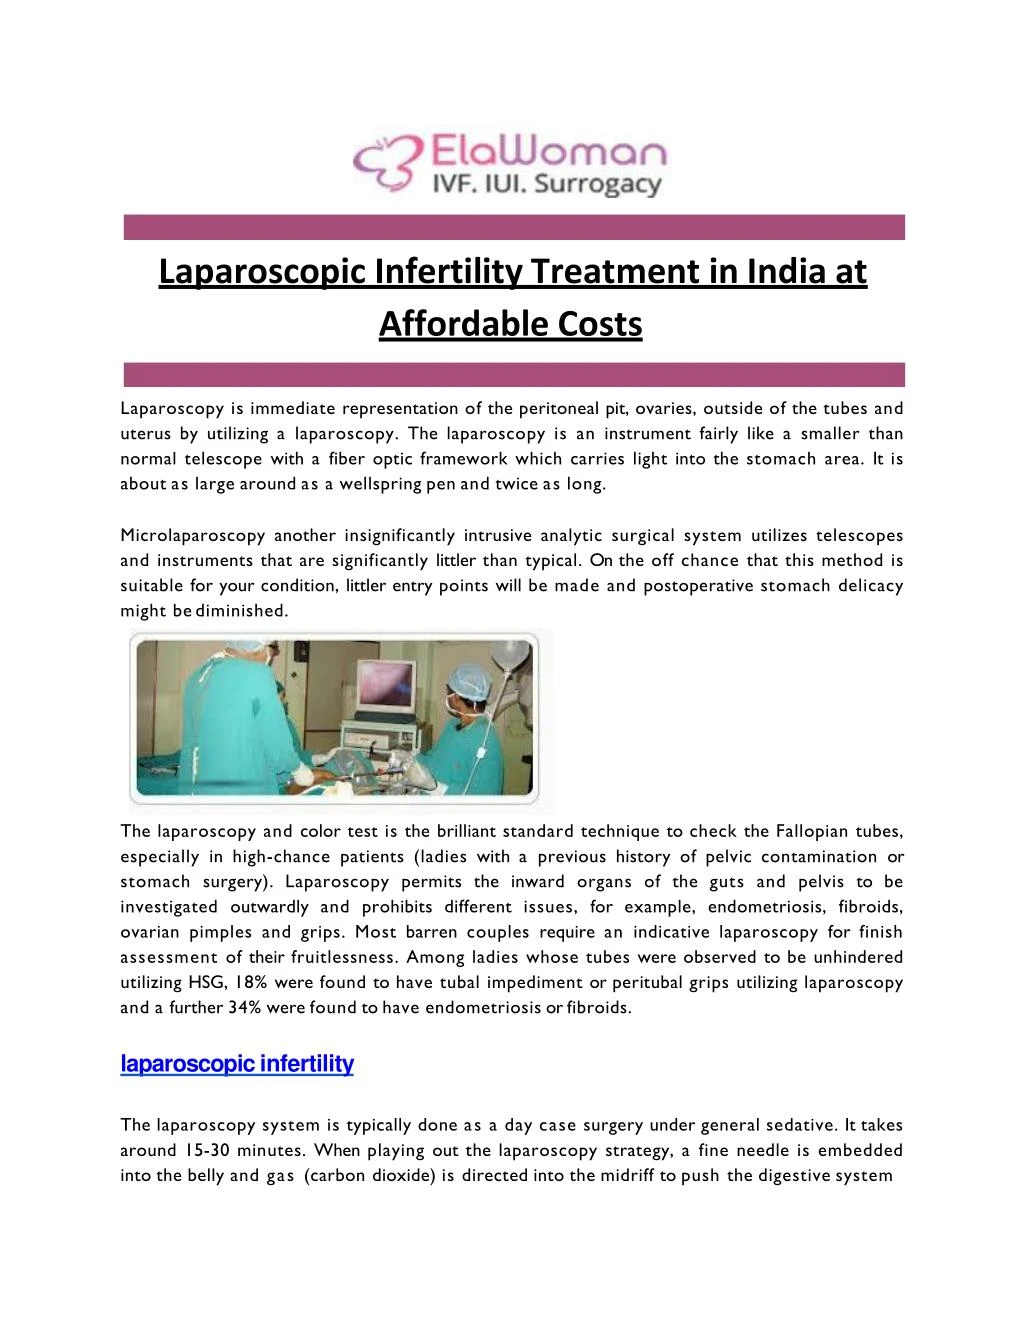 laparoscopic infertility treatment in india at affordable costs